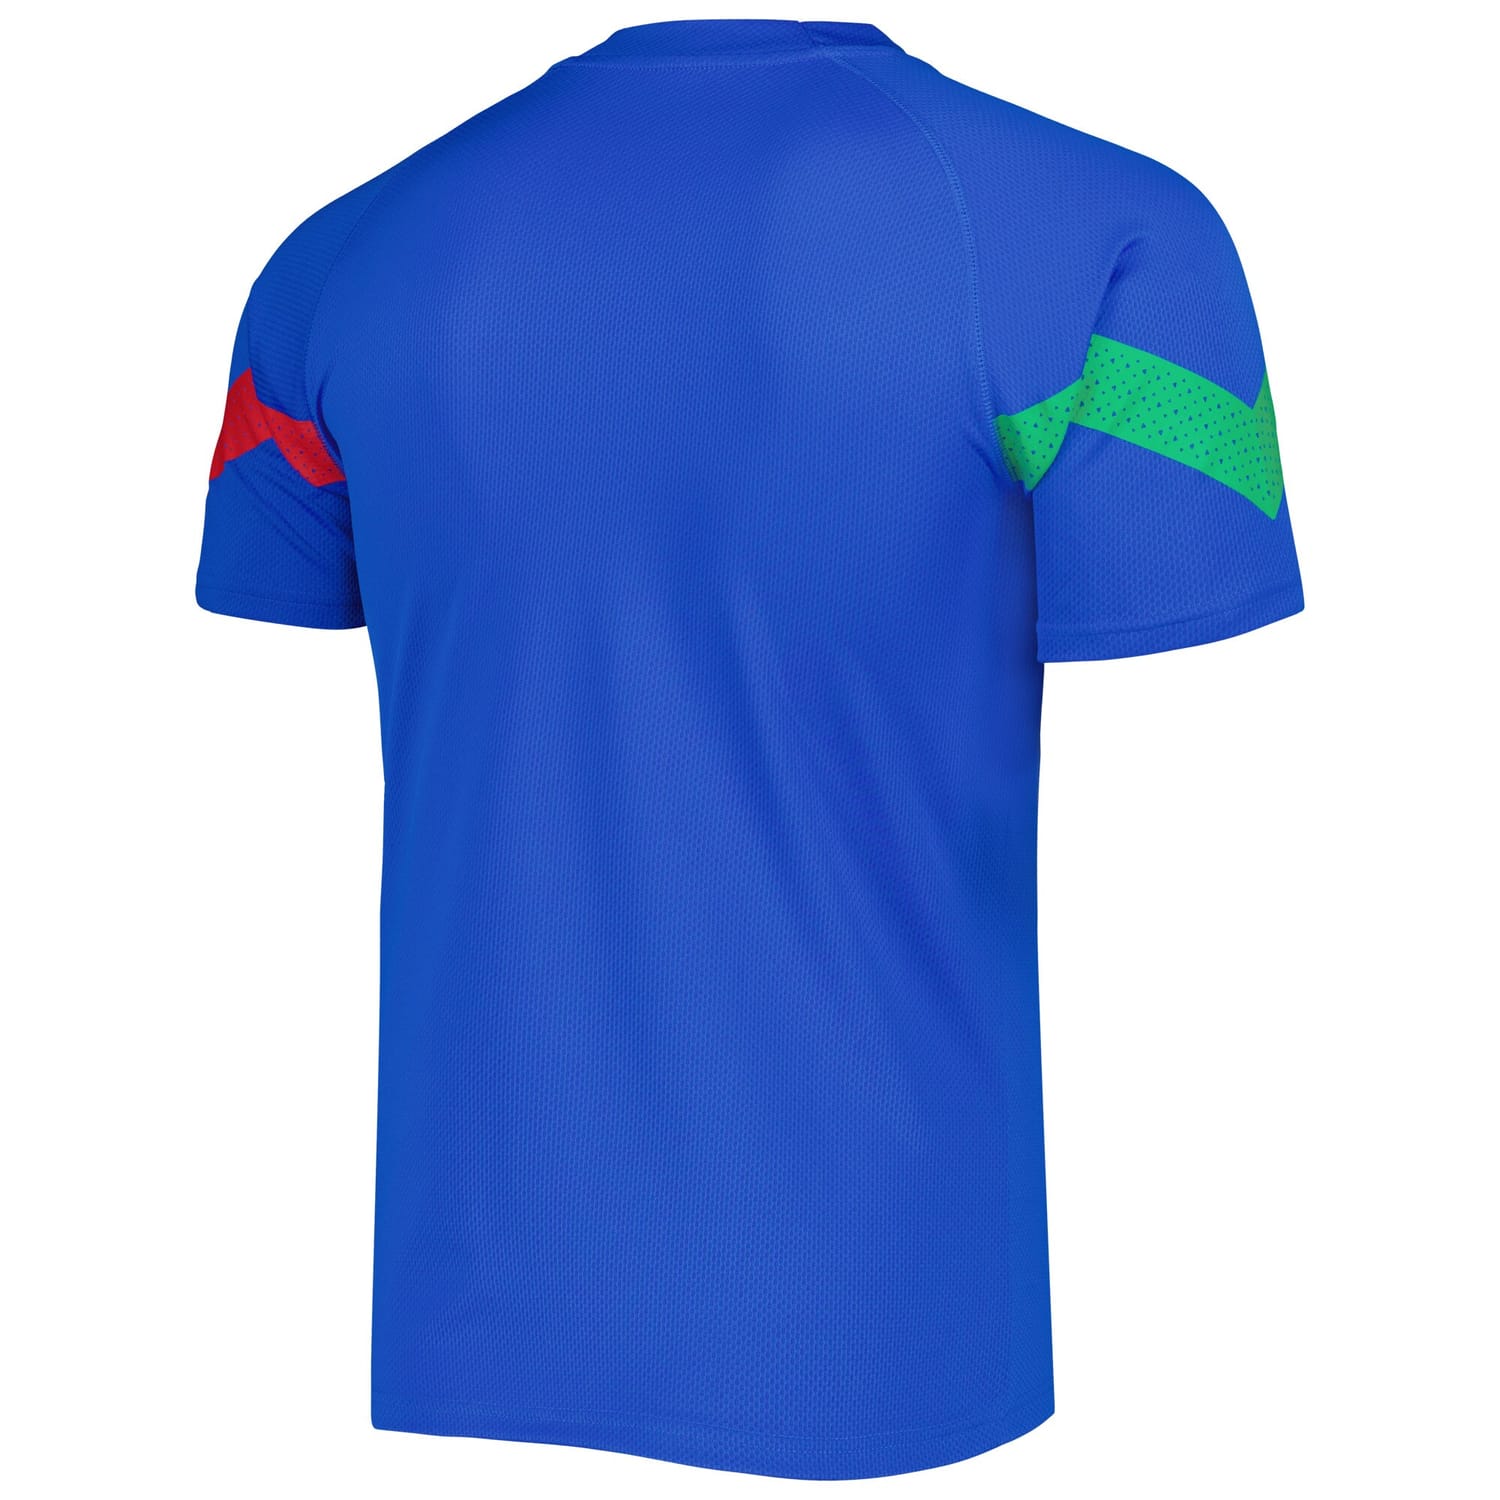 Italy National Team Training Jersey Shirt Blue 2022-23 for Men